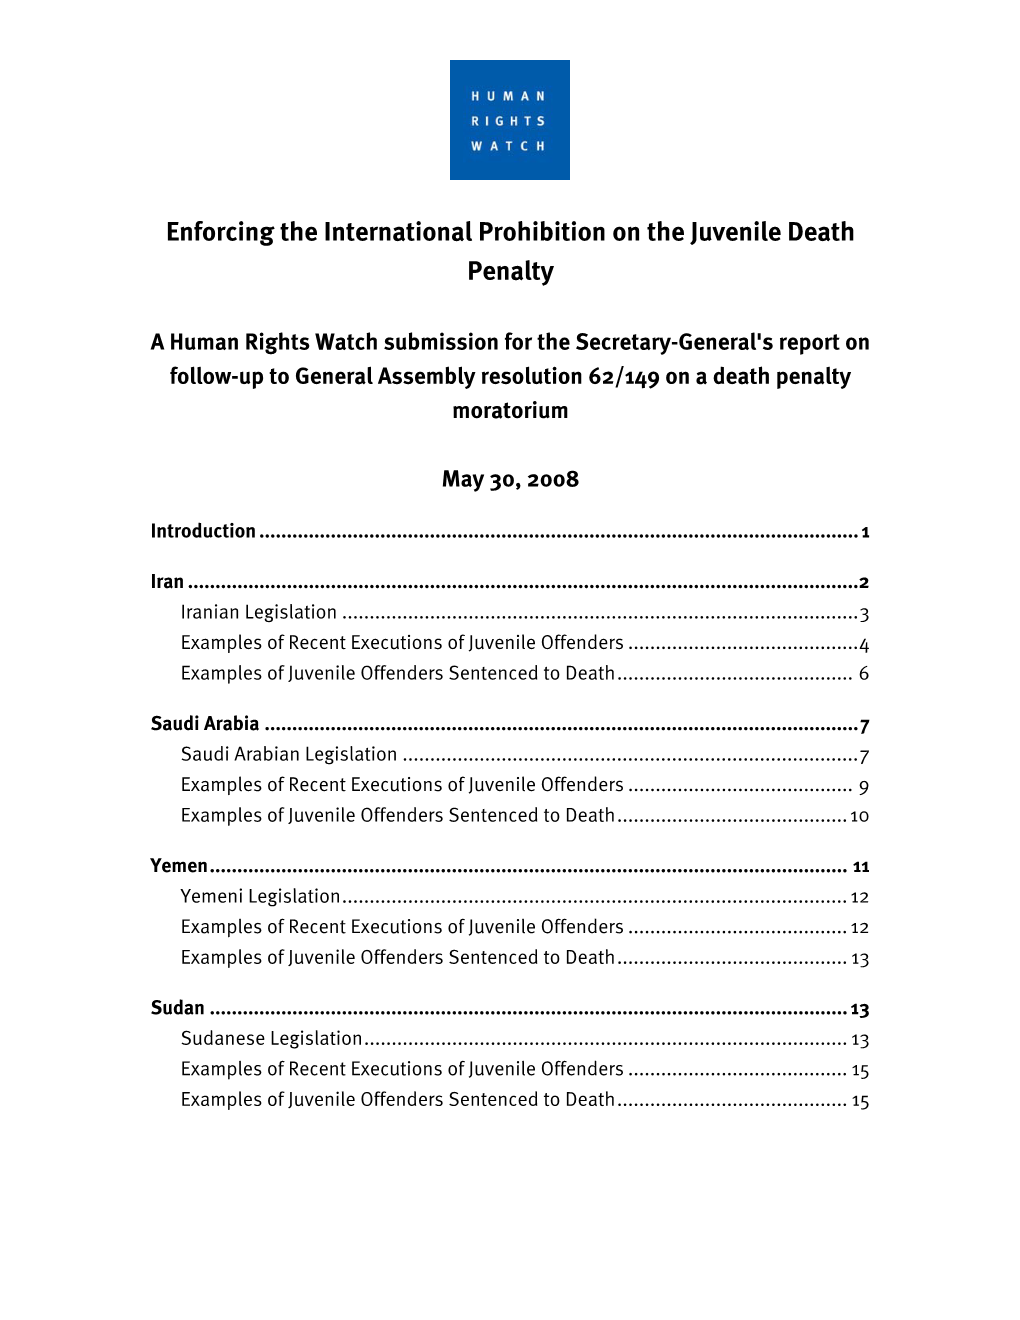 Enforcing the International Prohibition on the Juvenile Death Penalty